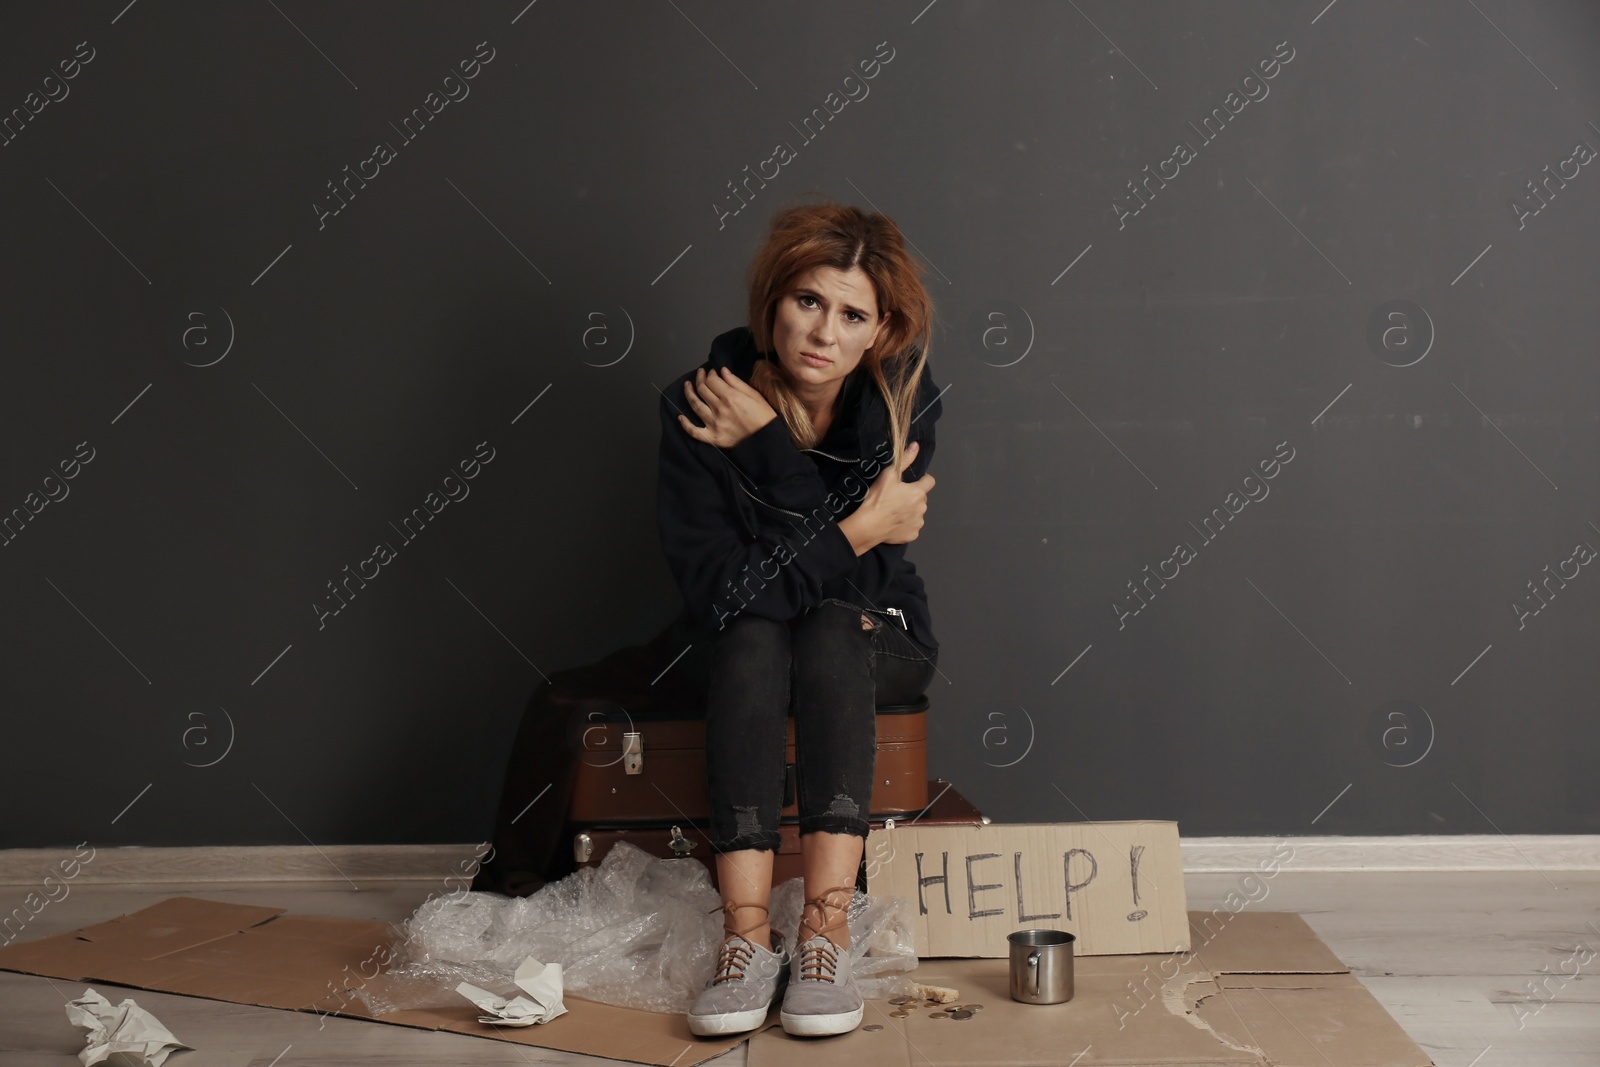 Photo of Poor homeless woman asking for help near dark wall